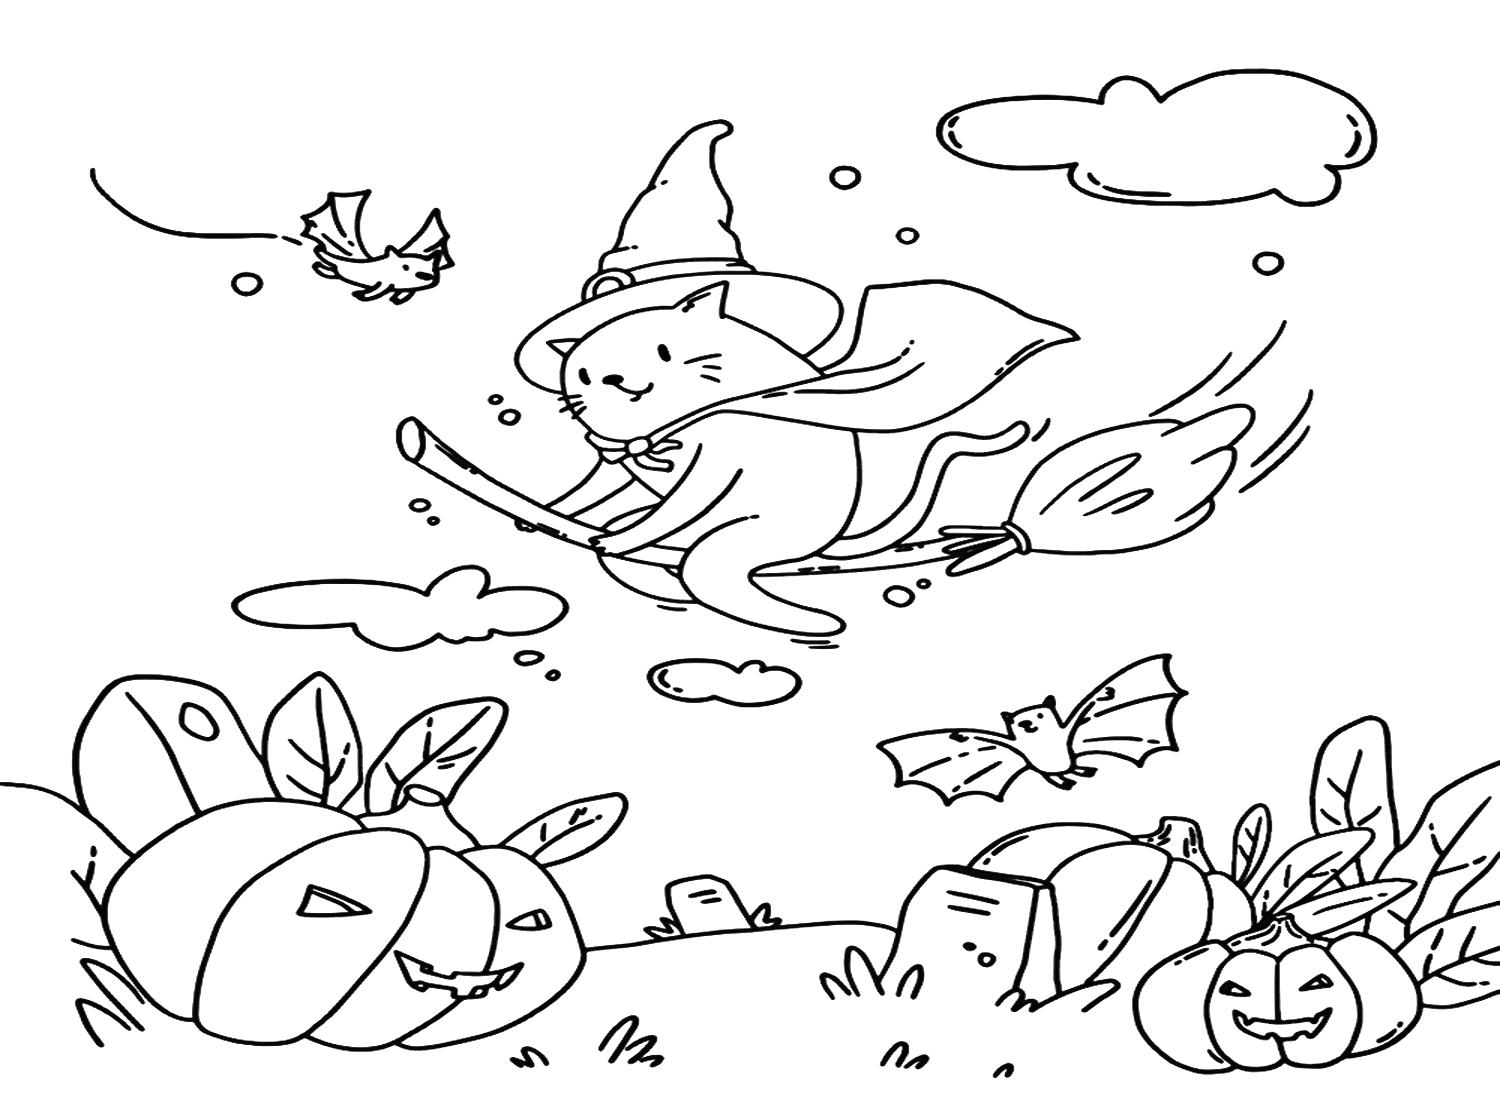 Cat Witch Coloring Page